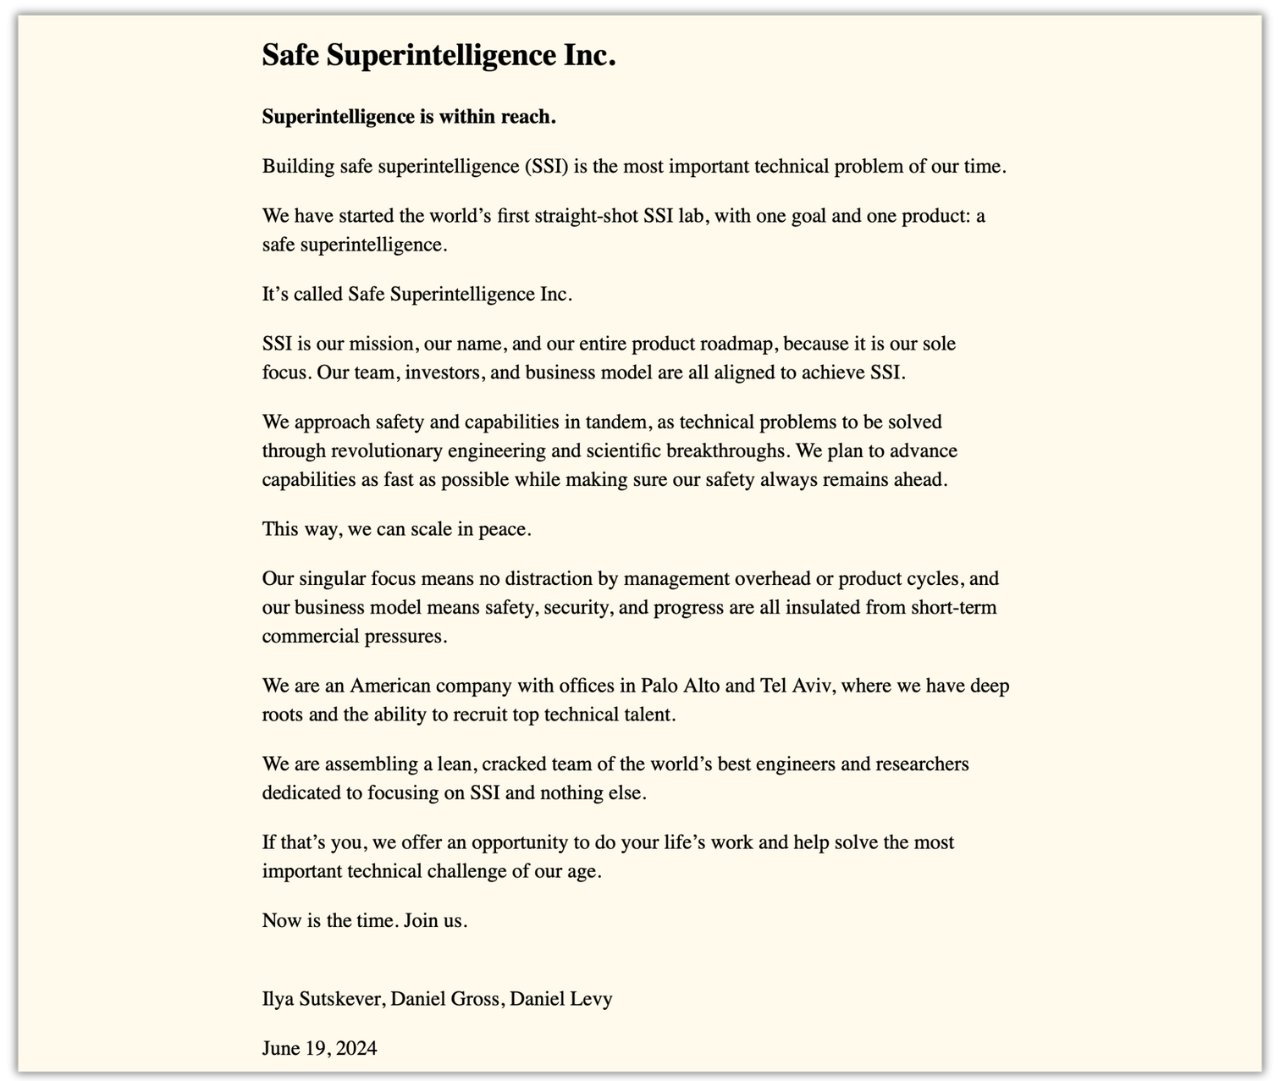 what is safe superintelligence inc